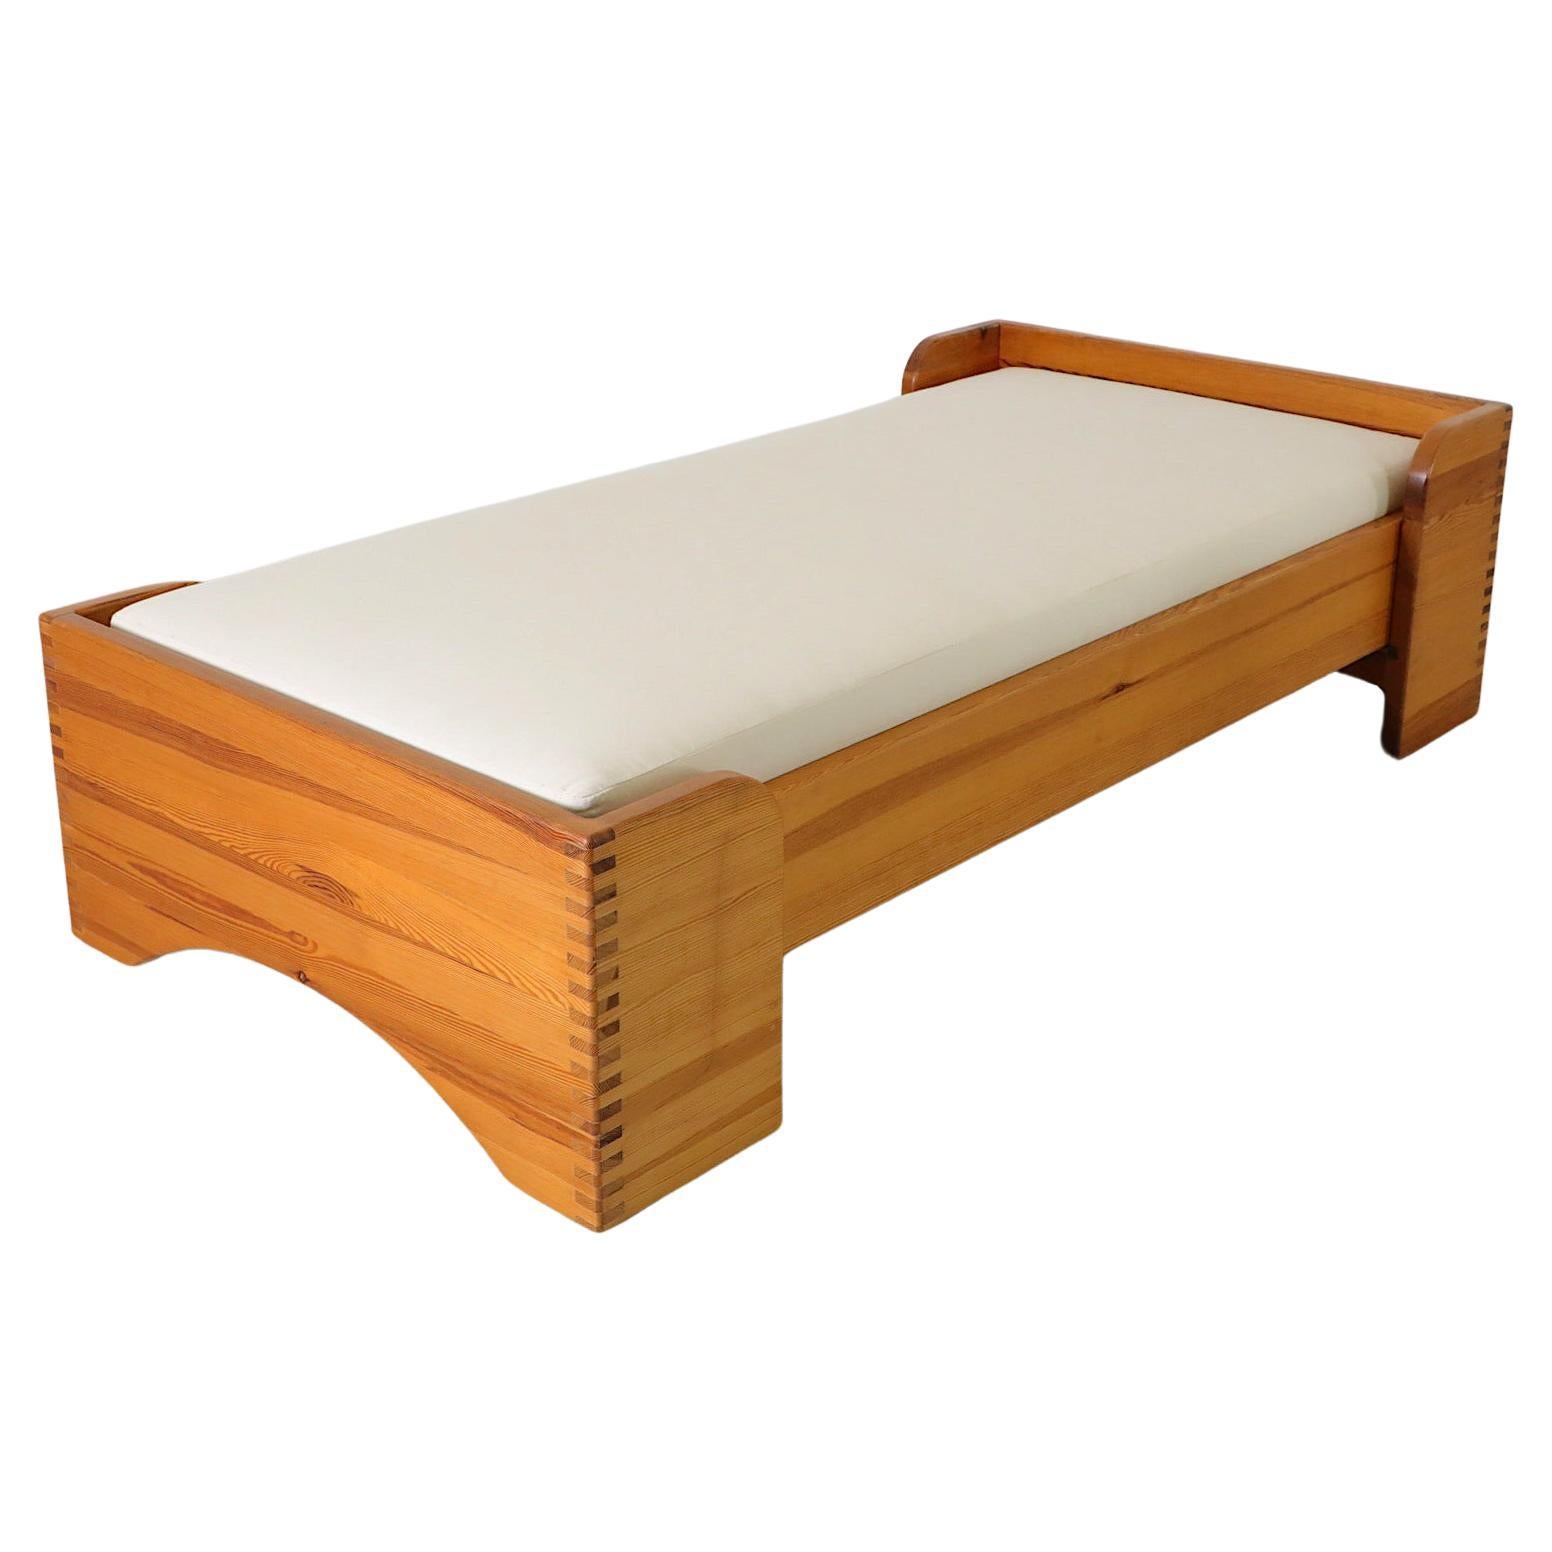 Ate Van Apeldoorn Pine Single Bed Frame with Box Joints and Arched Base